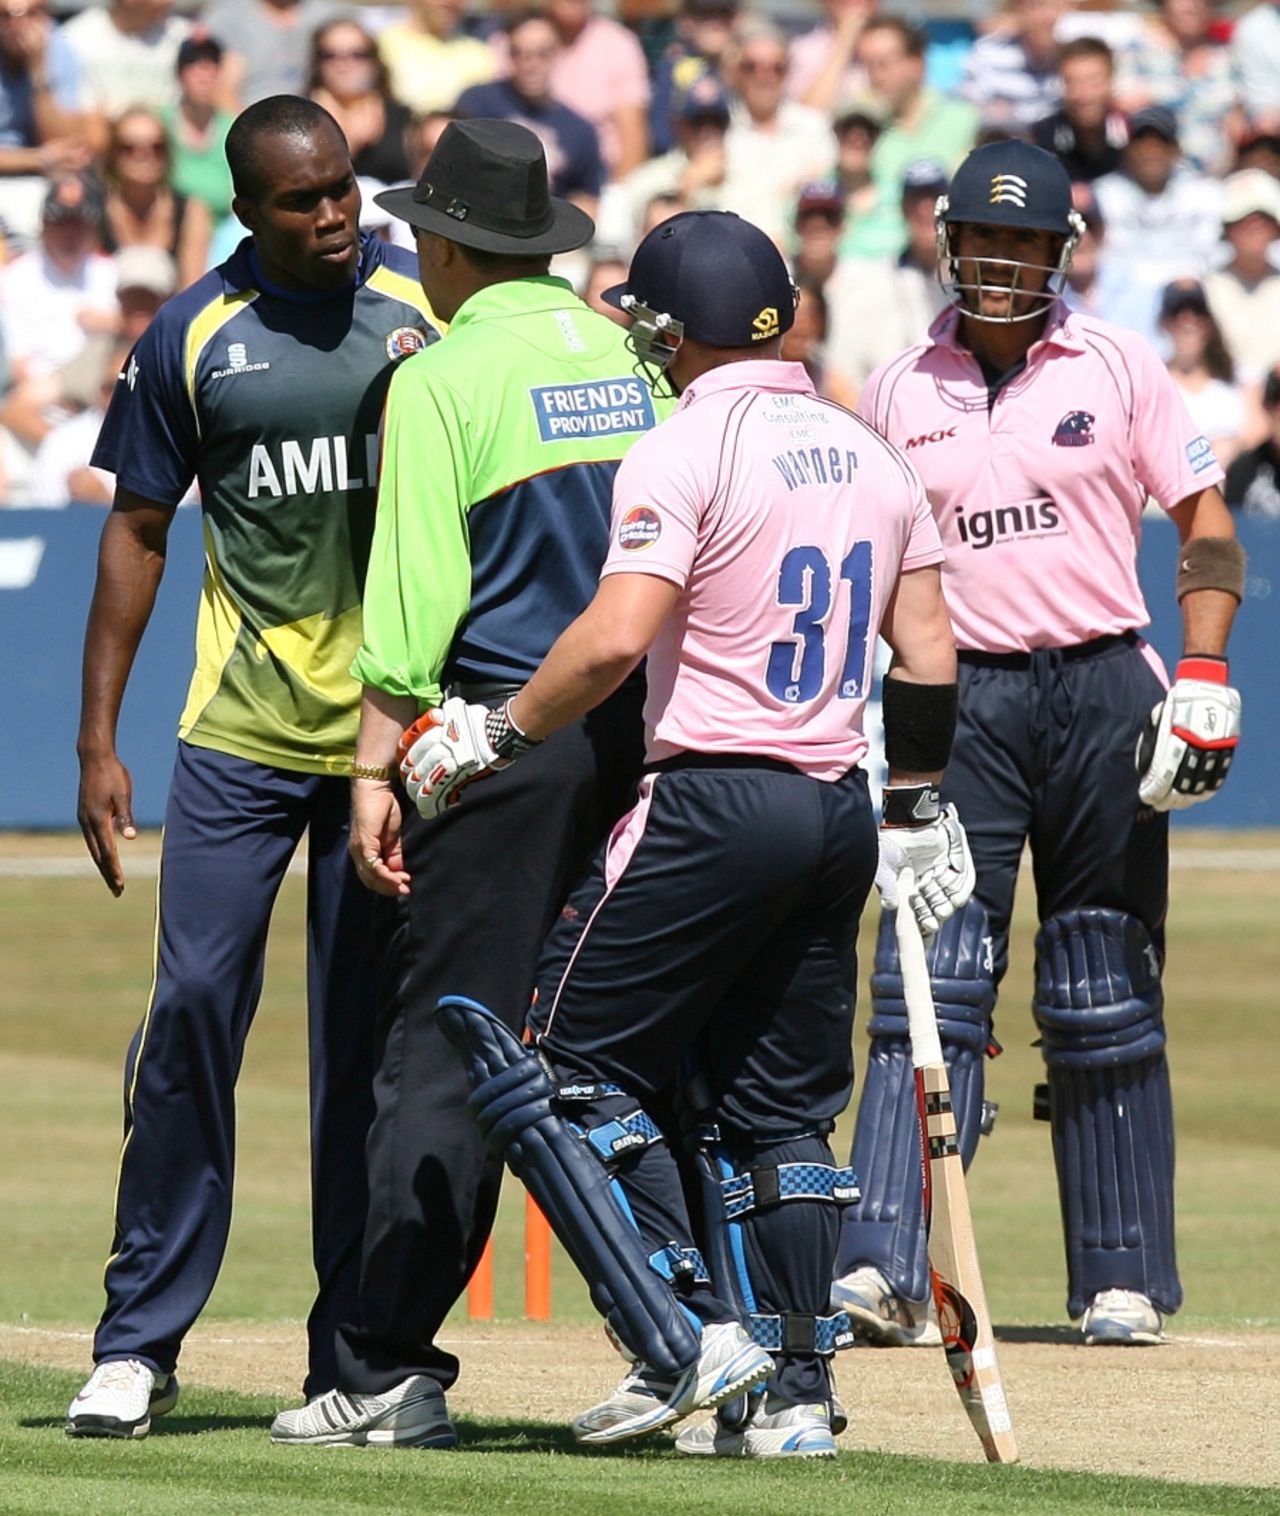 The umpire had to intervene in a spat between Maurice Chambers and David Warner, Essex v Middlesex, Friends Provident t20, Chelmsford, July 18, 2010